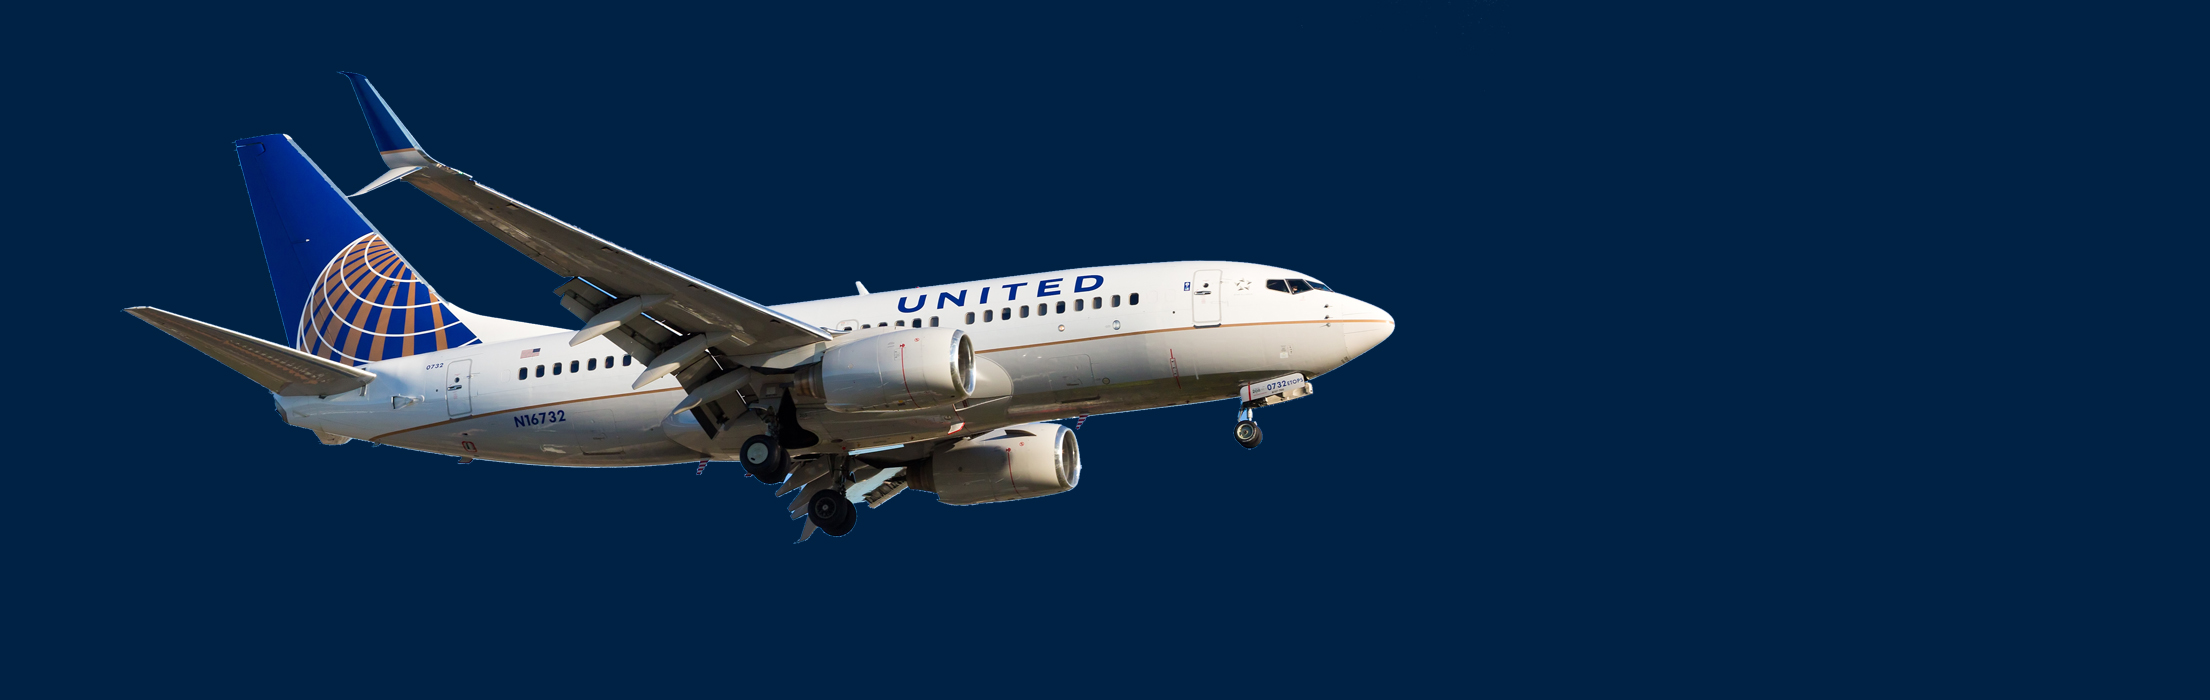 United Airlines Phone Number - Call 24/7 +1-800-201-4791